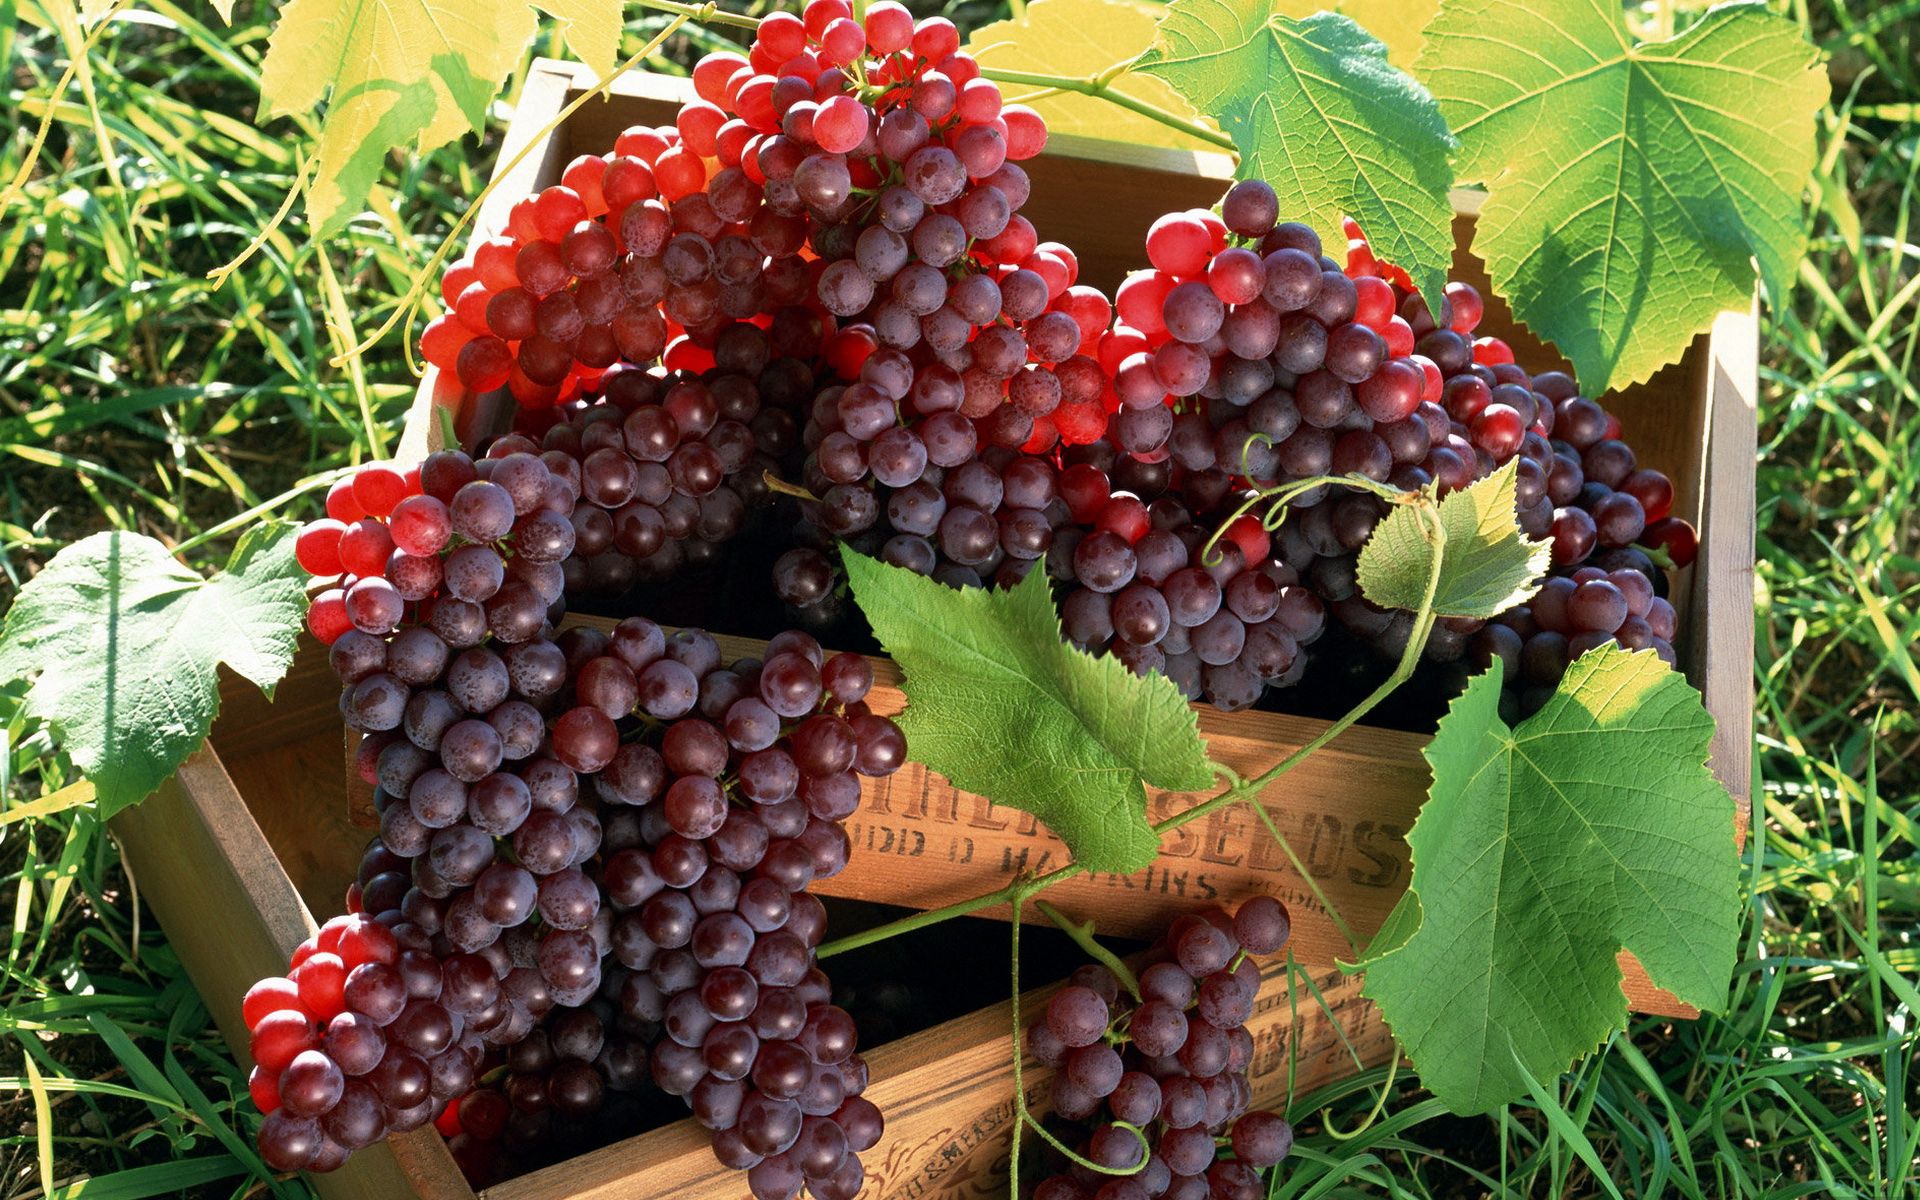 grapes, fruits, food, bunches, clusters, boxes